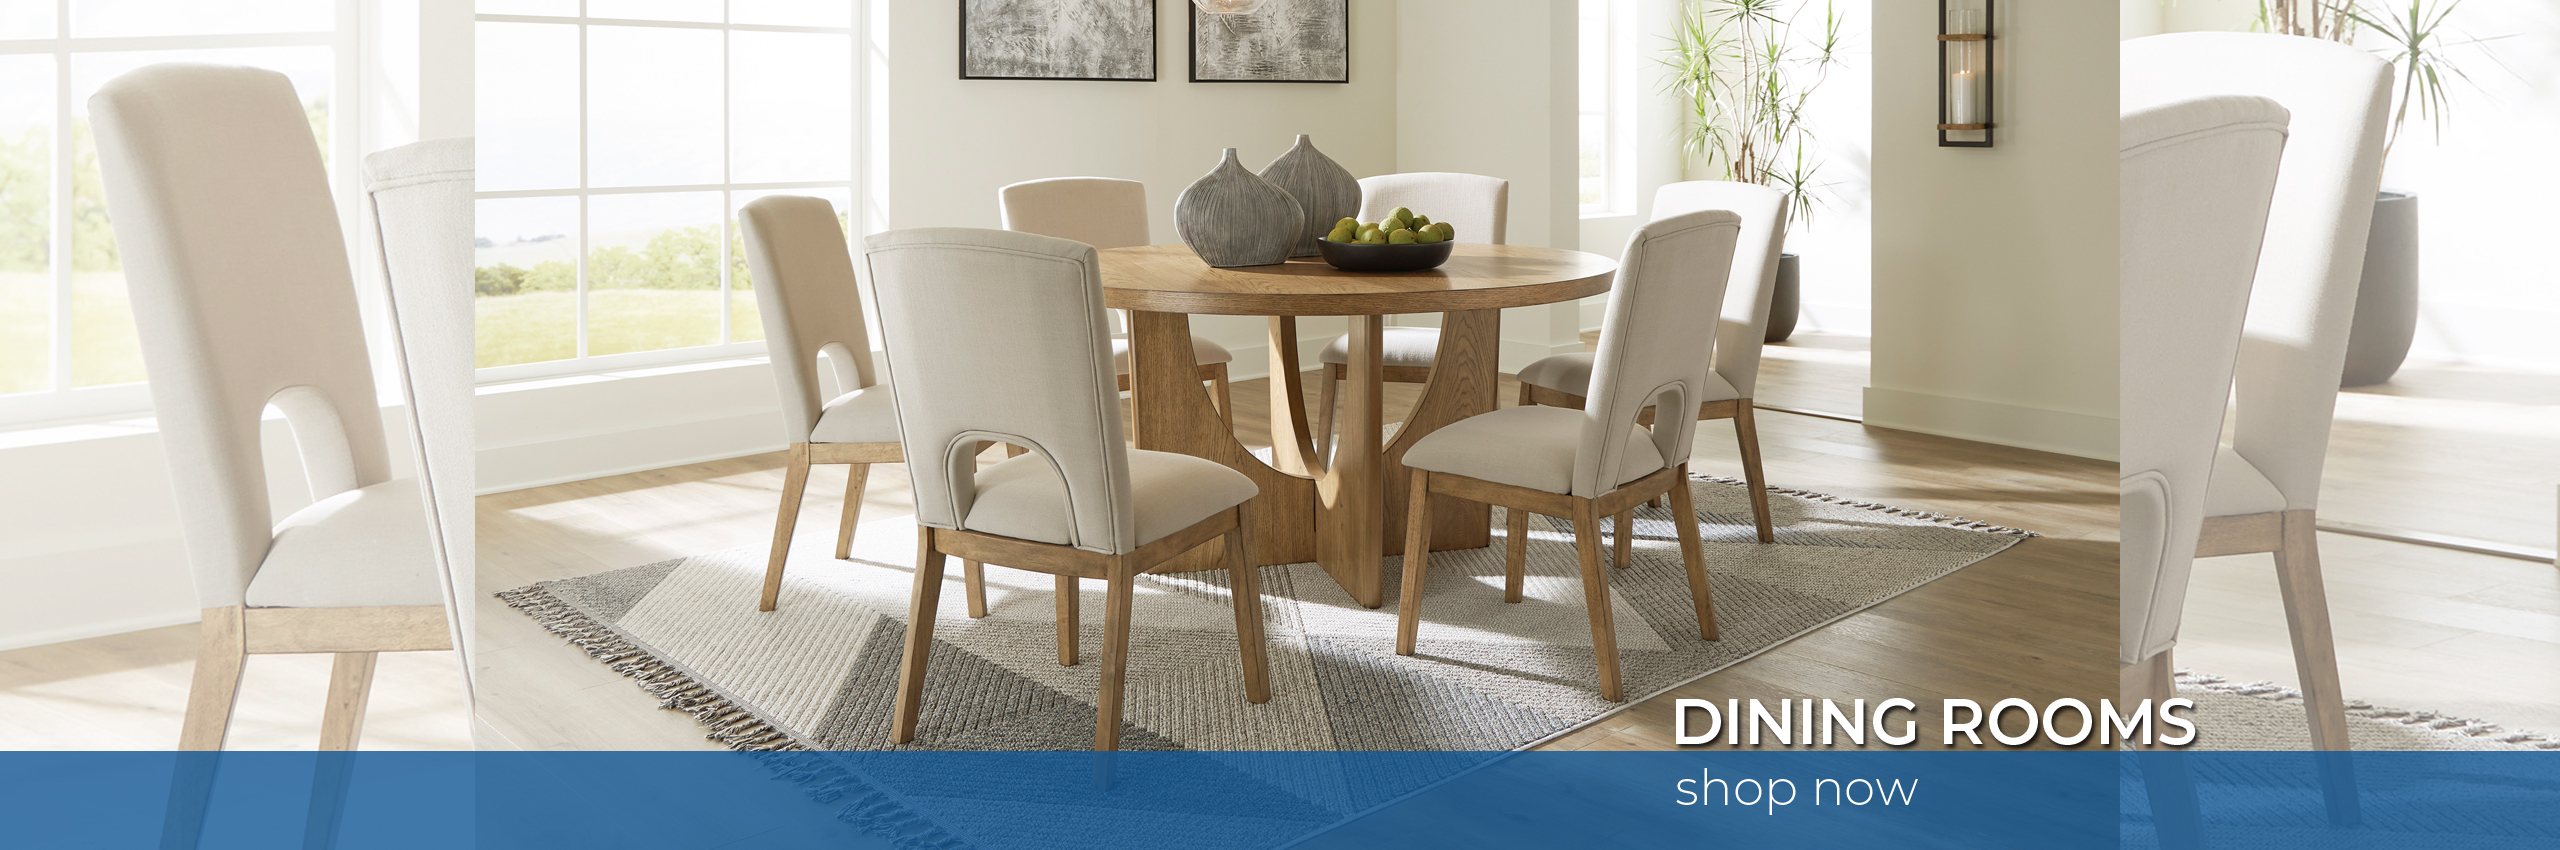 Dining Rooms Shop Now